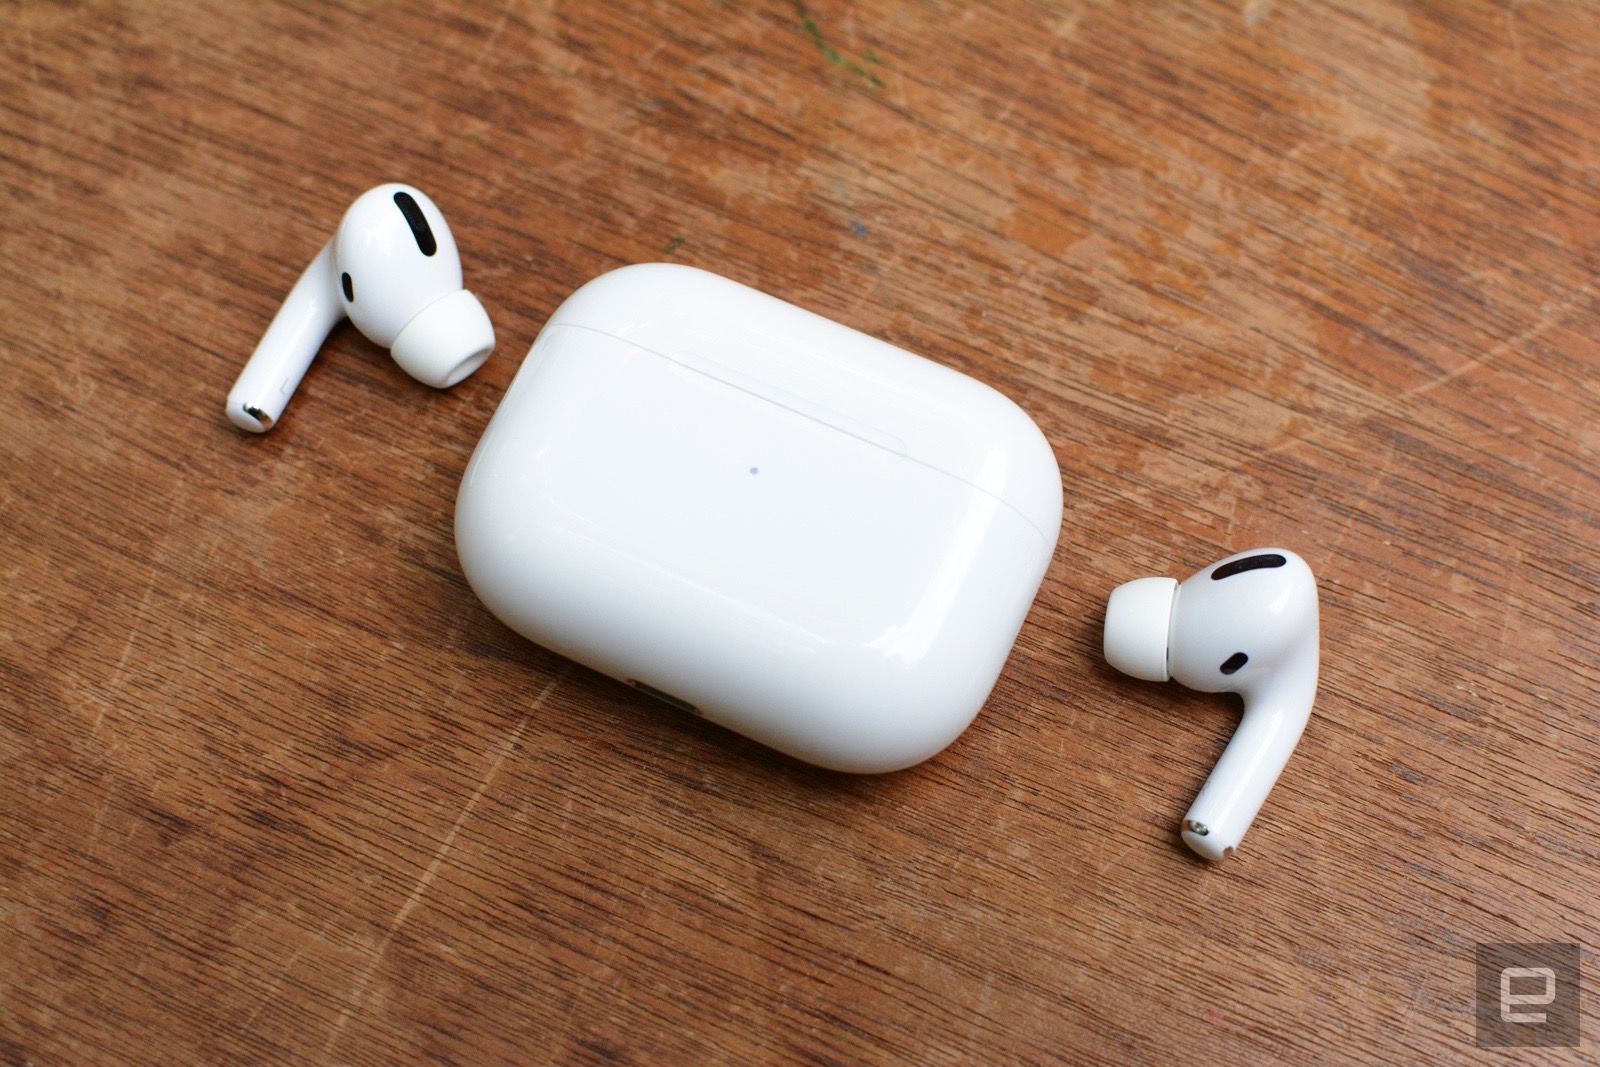 The best deals on headphones, earbuds and audio gadgets we found for Black Friday 1